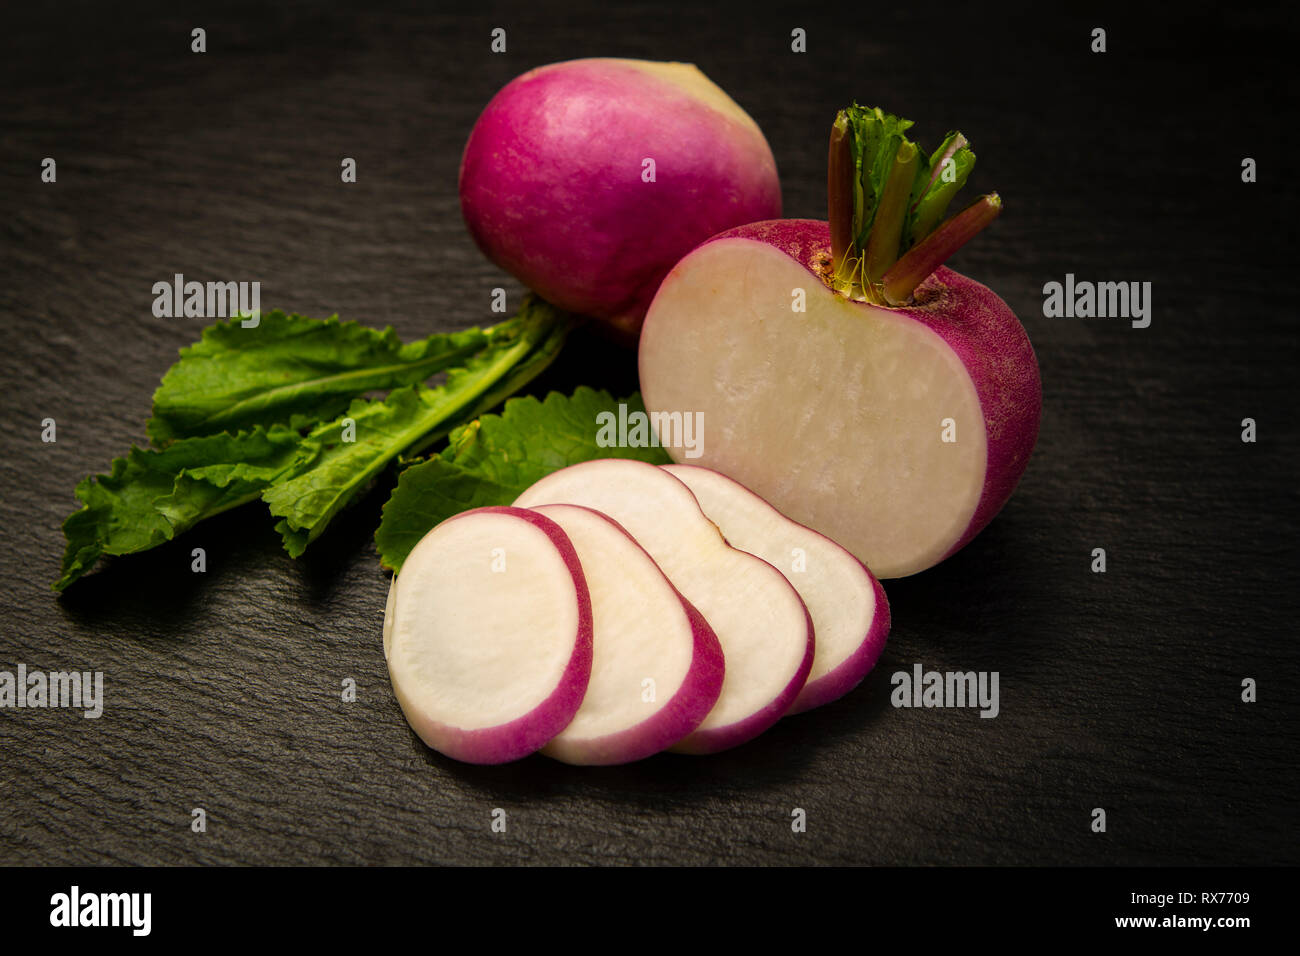 close-up of a red turnips sliced over a black background Stock Photo